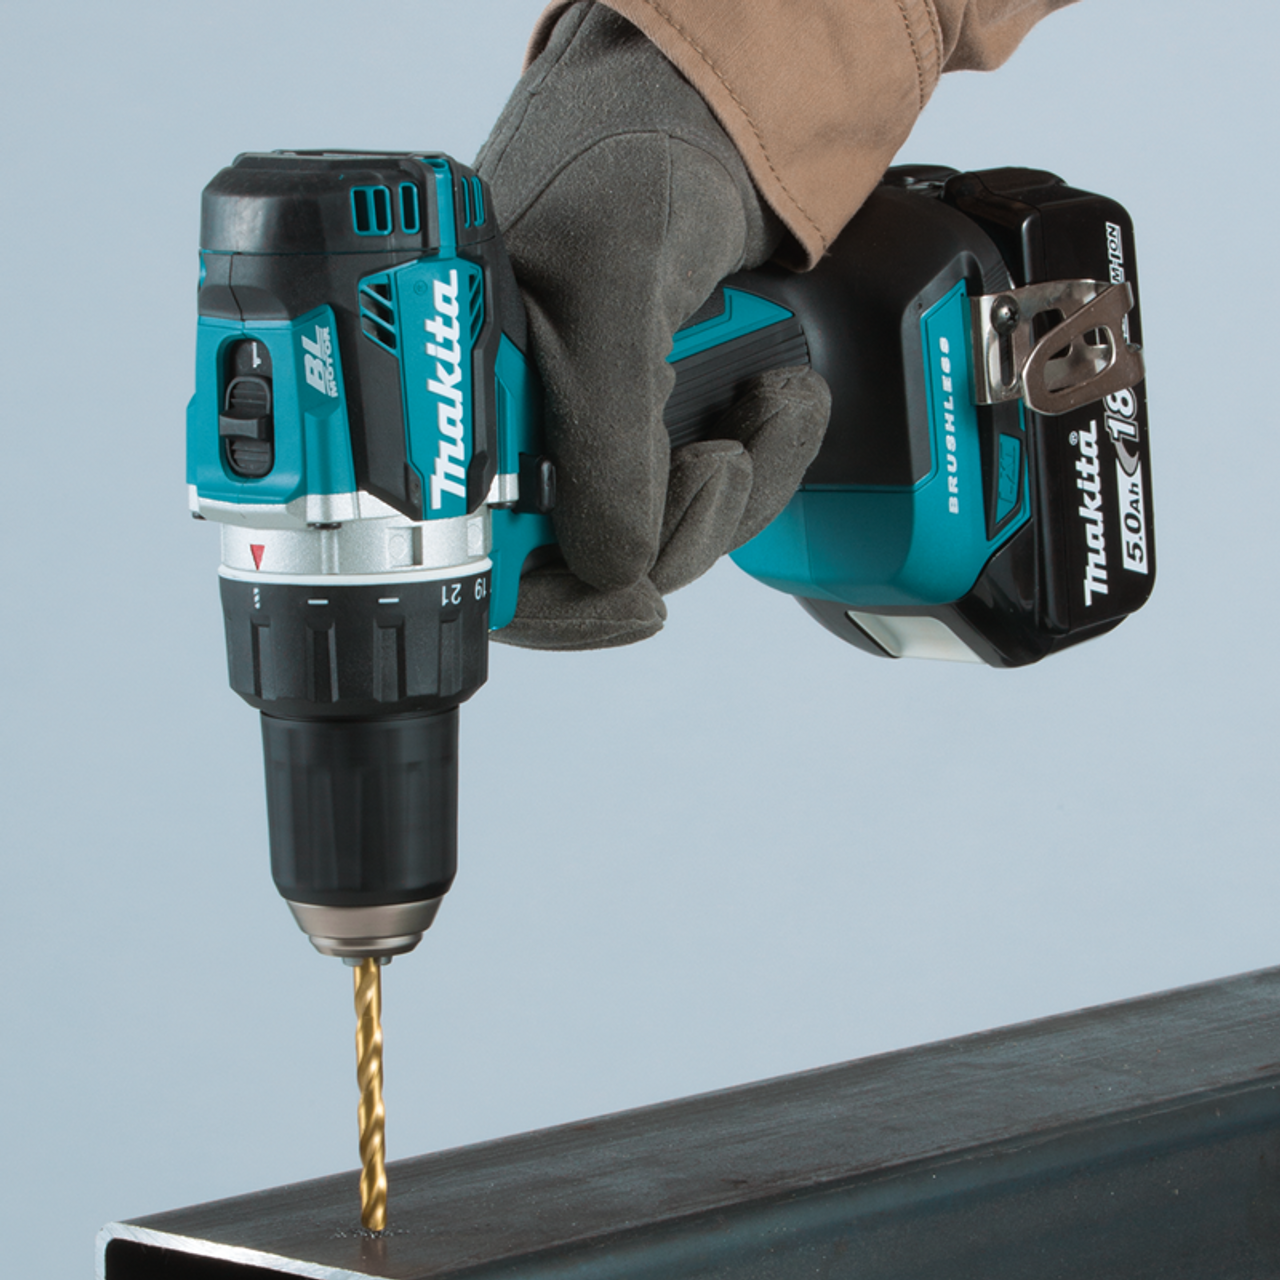 18V LXT? Lithium-Ion Compact Brushless Cordless 1/2" Driver-Drill Kit (5.0Ah), Compact and ergonomic design, XFD12T